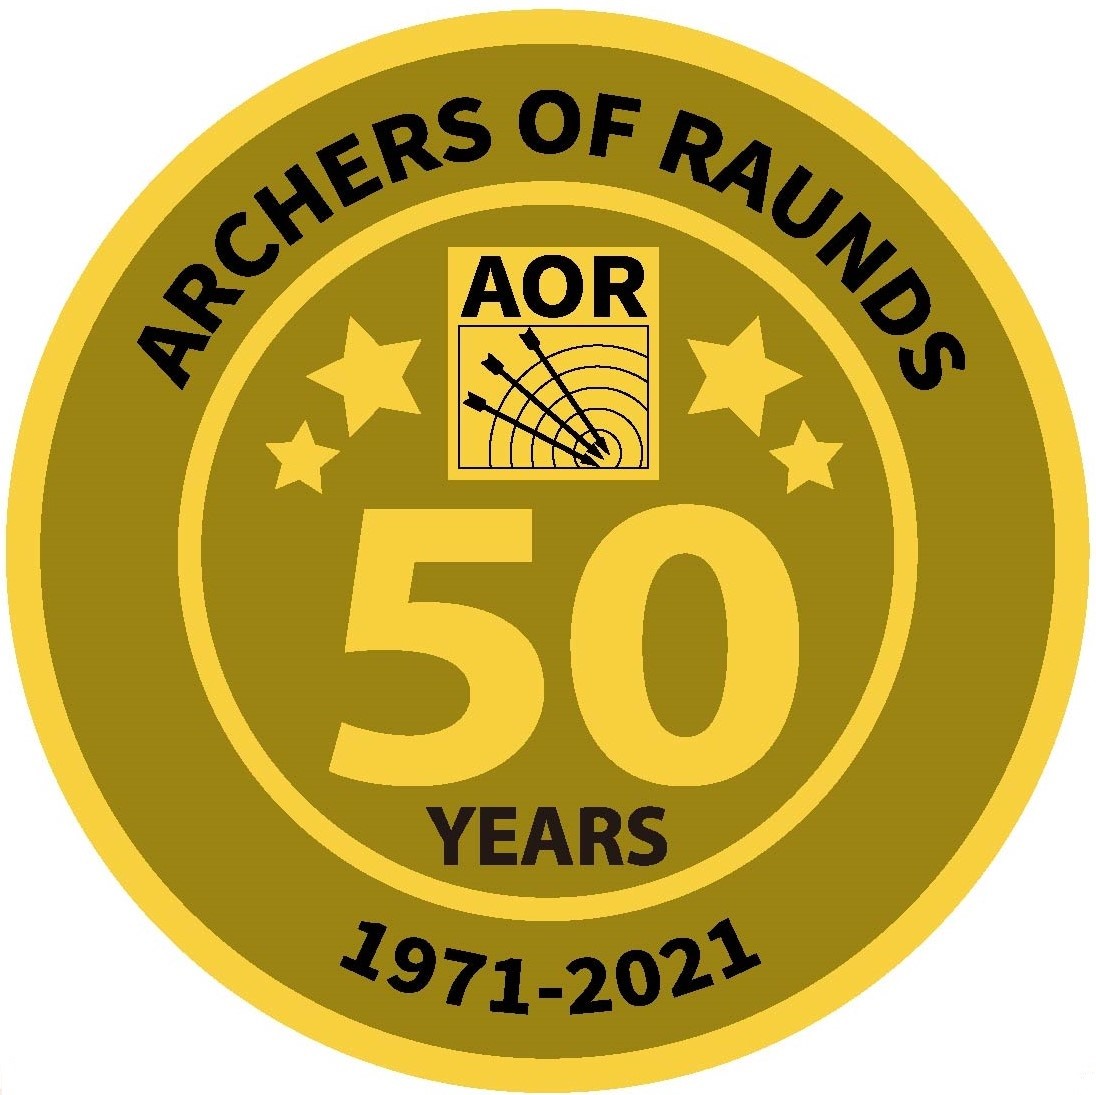 Archers of Raunds Medal